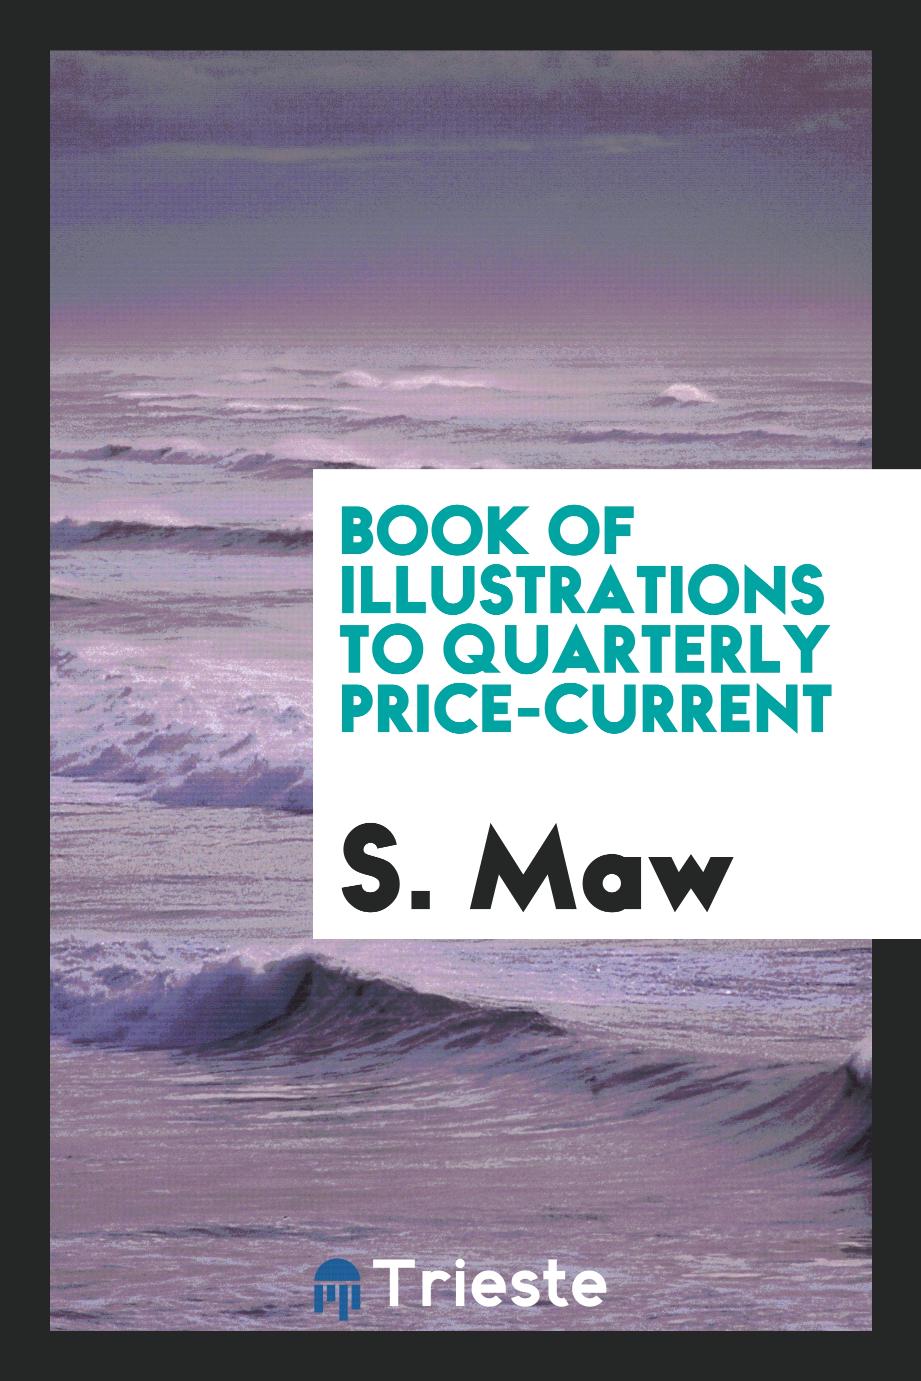 Book of illustrations to Quarterly price-current